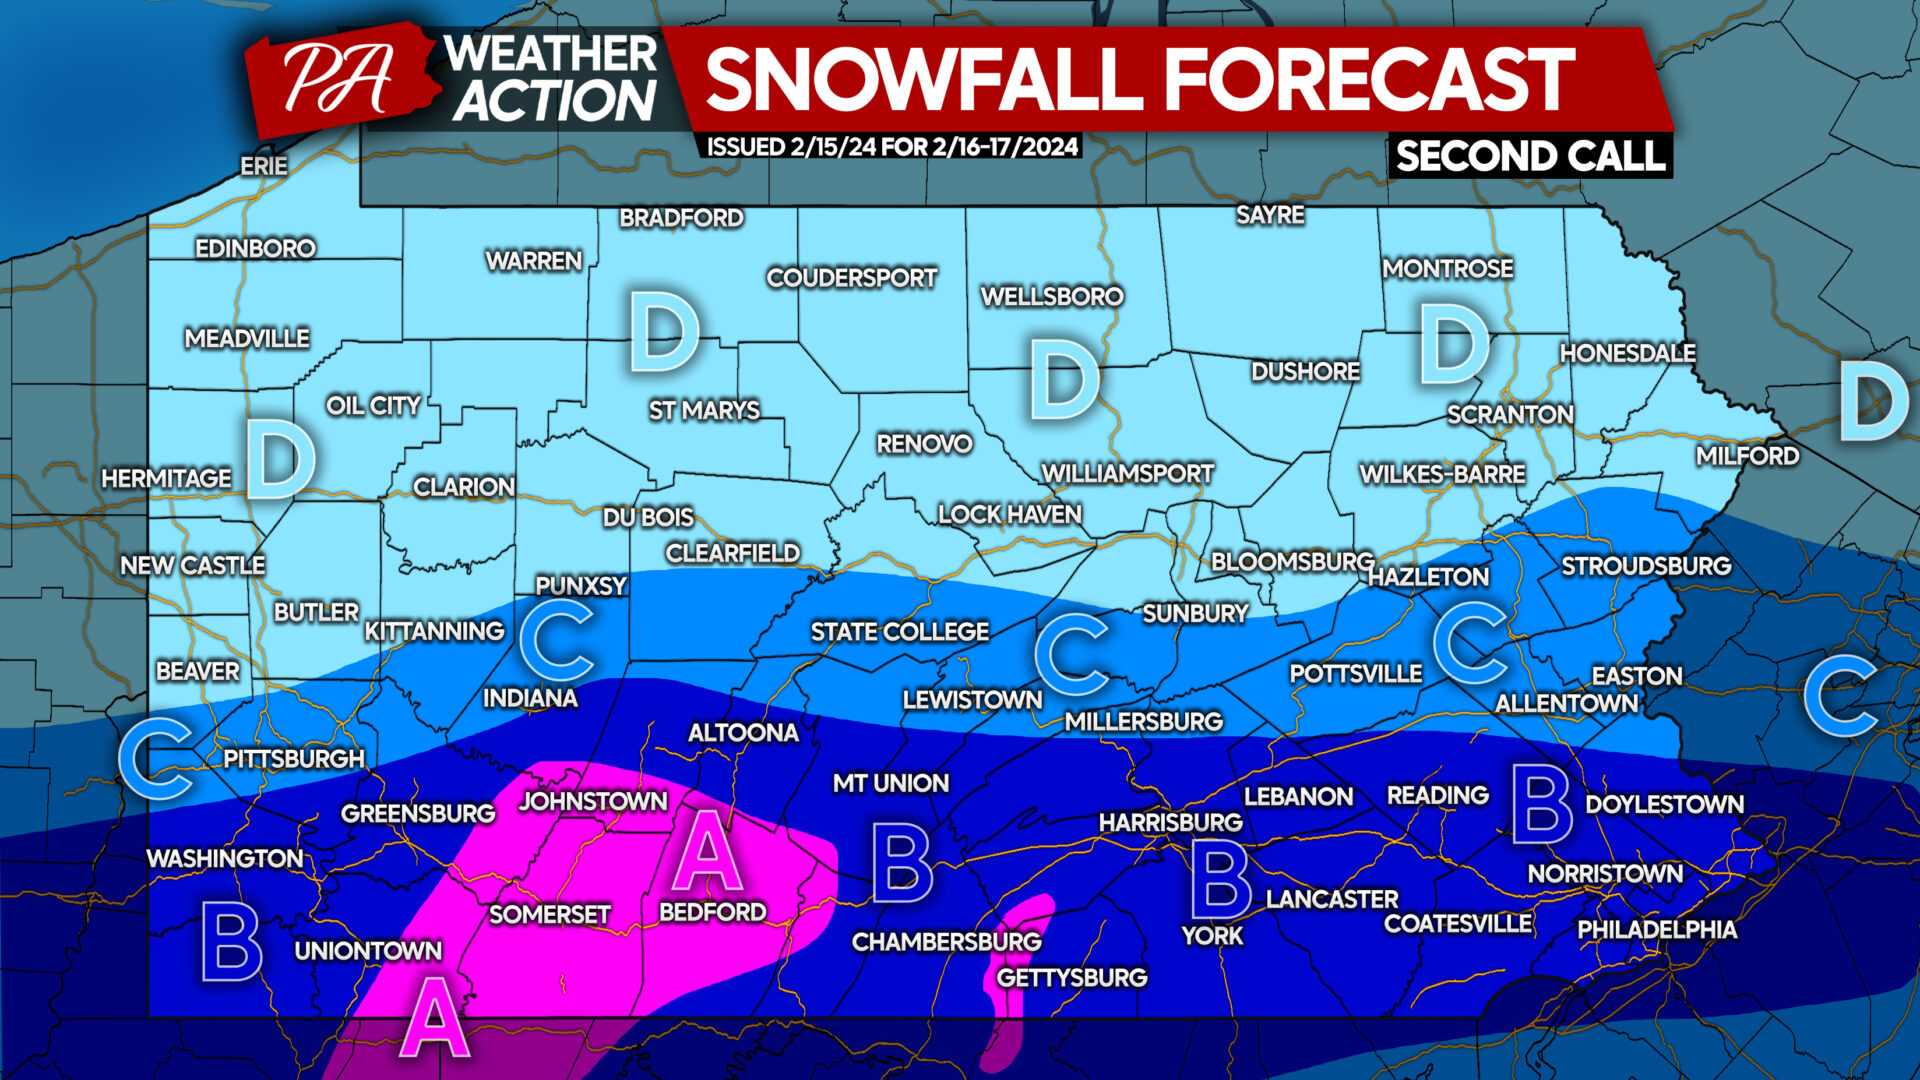 Second Call Snowfall Forecast for Early Weekend Snowstorm Across Parts of Pennsylvania (2/16-17)